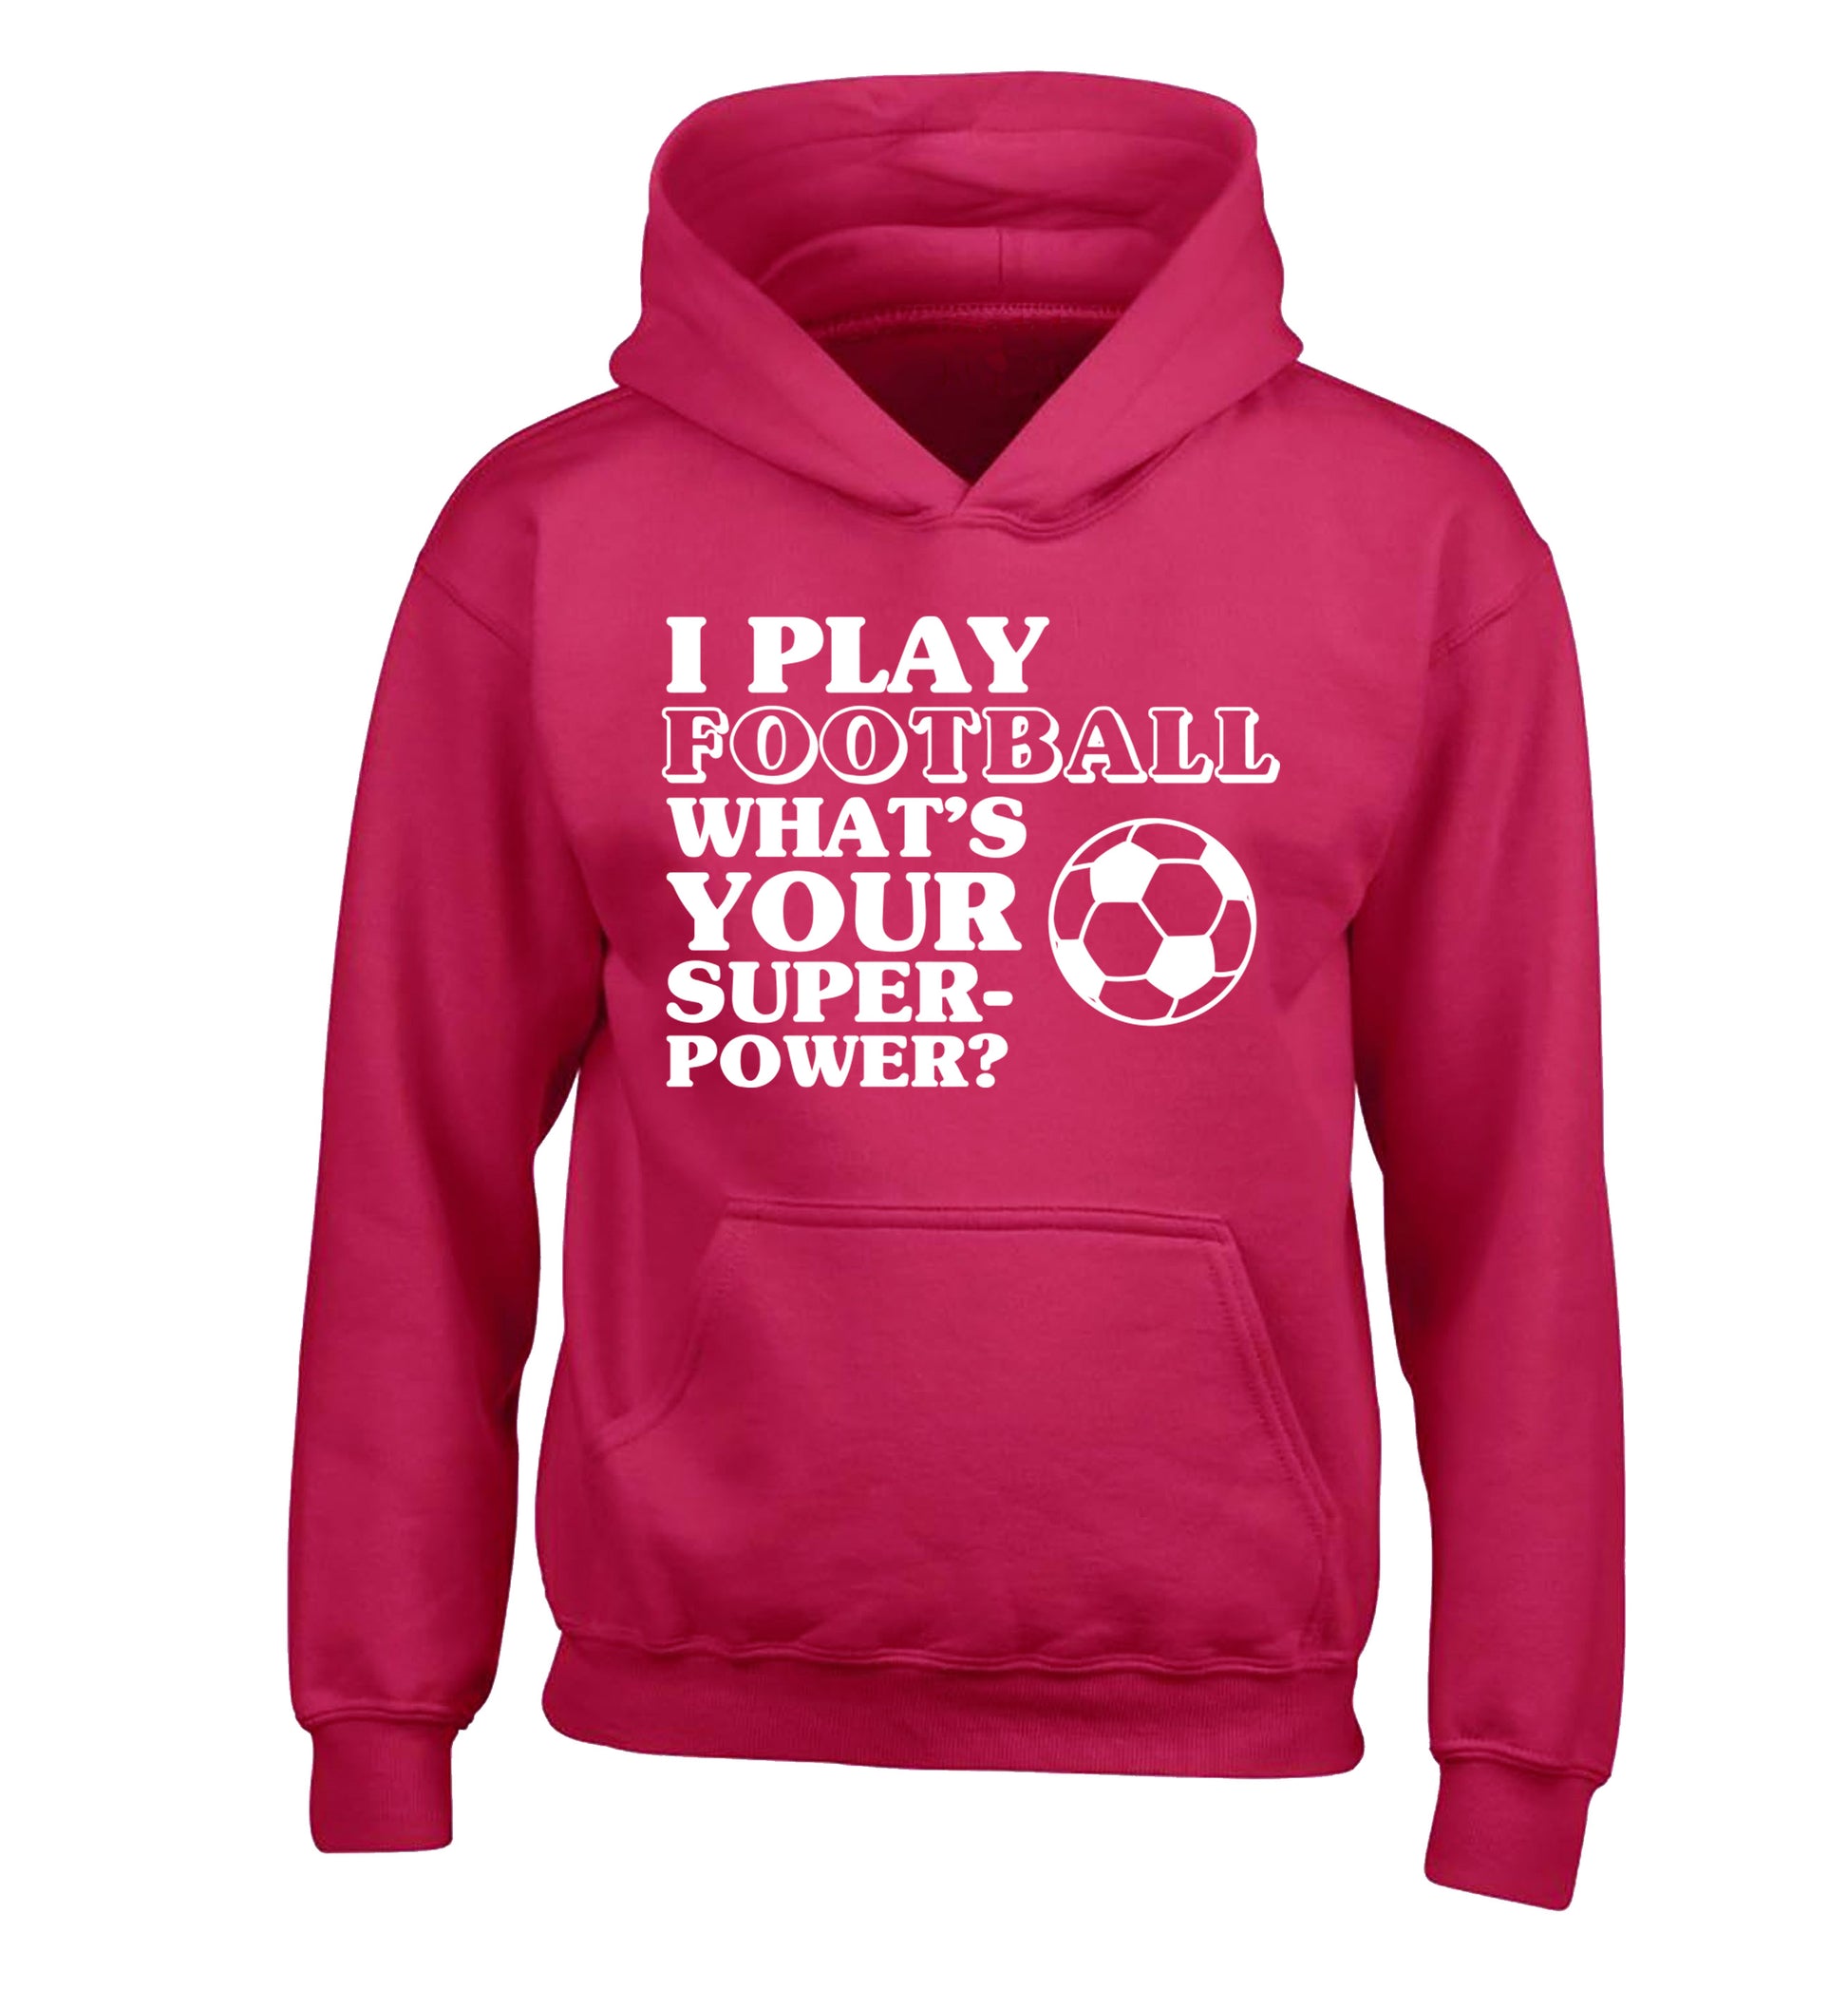 I play football what's your superpower? children's pink hoodie 12-14 Years